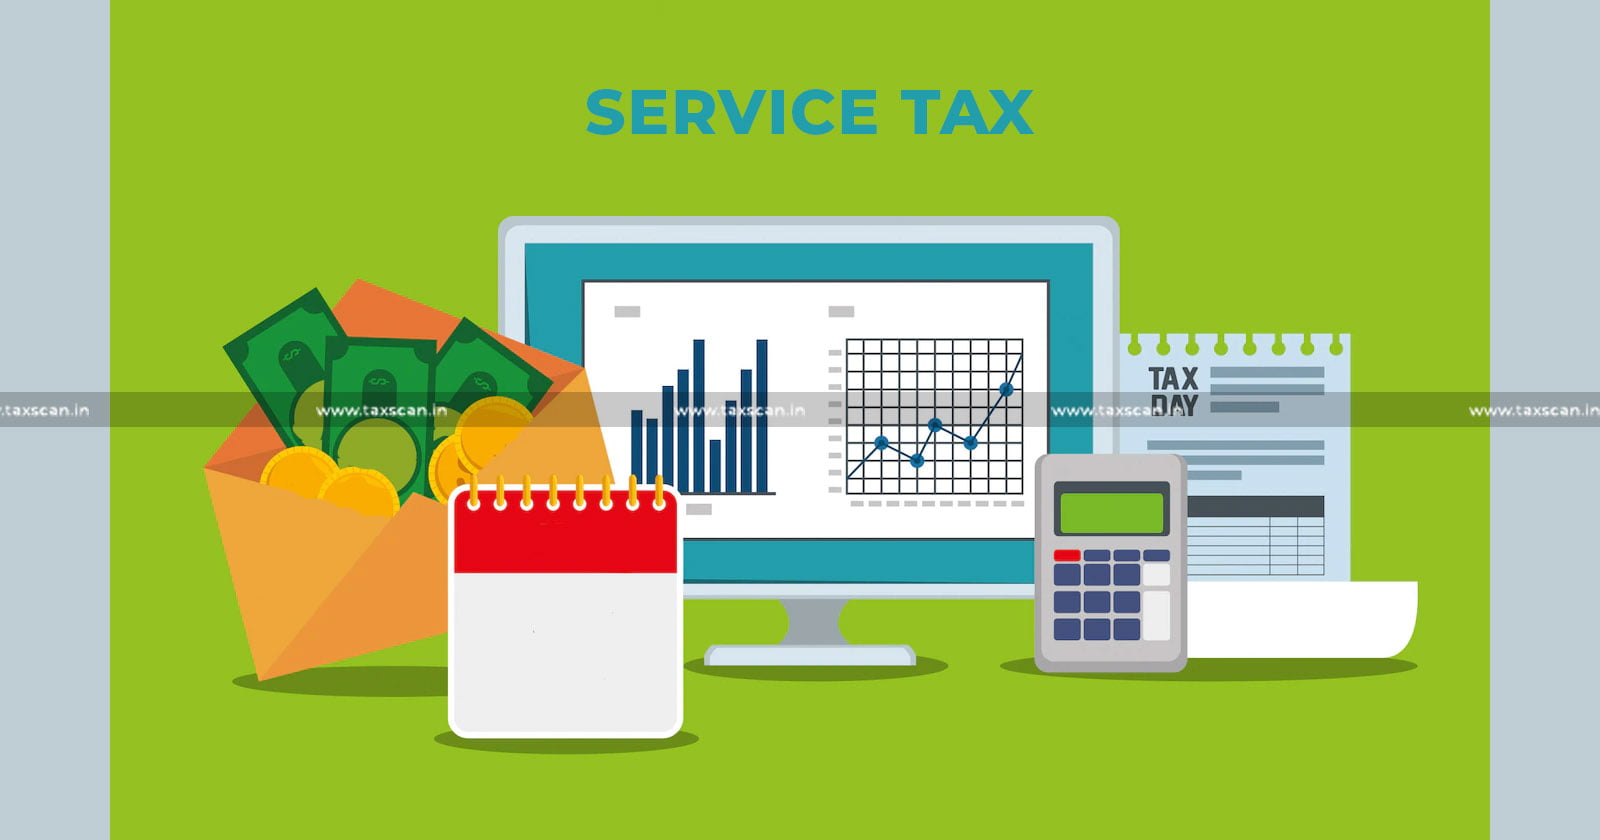 Financial Hardship not Reason to Avoid Payment of Service Tax - CESTAT upholds Service Tax Demand under BAS - TAXSCAN